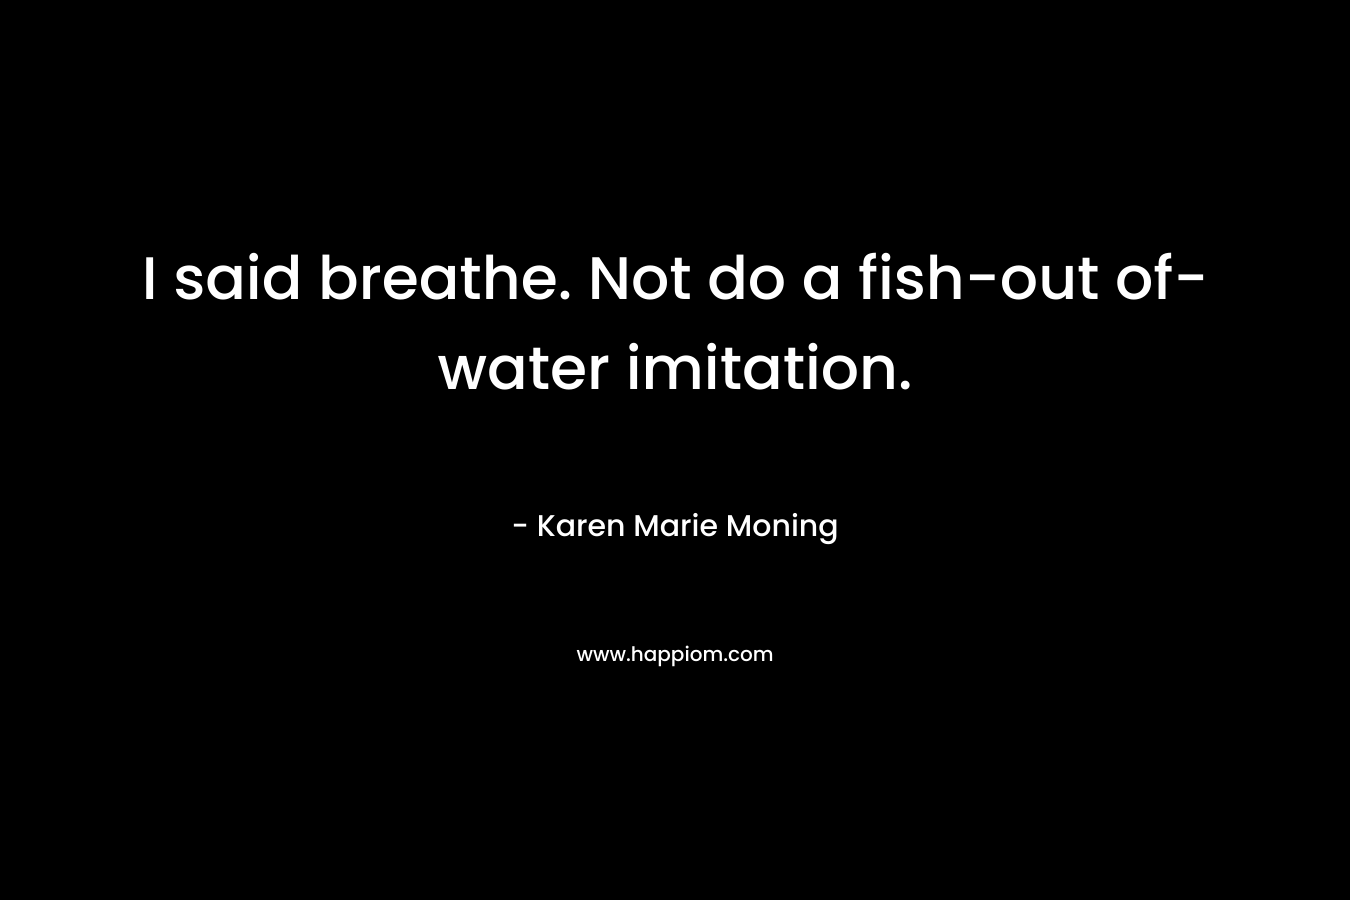 I said breathe. Not do a fish-out of-water imitation. – Karen Marie Moning